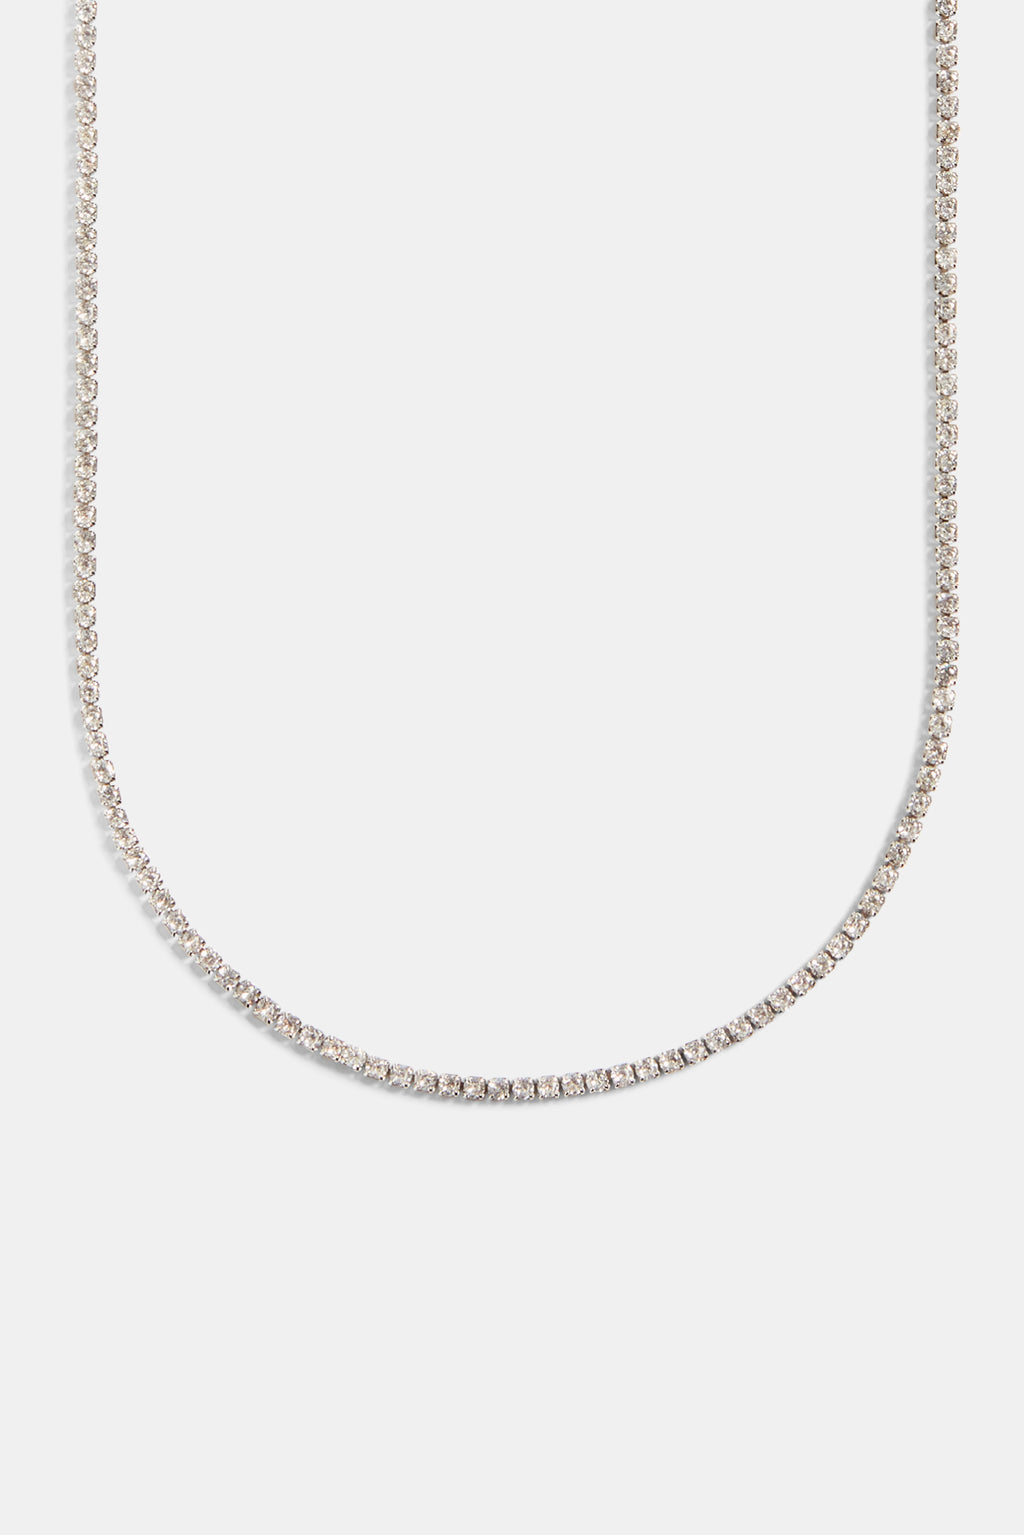 Leslie's 14K Yellow Gold 2.5mm Solid Rope Chain Necklace - Length 30''  inches - (B18-565) - Roy Rose Jewelry